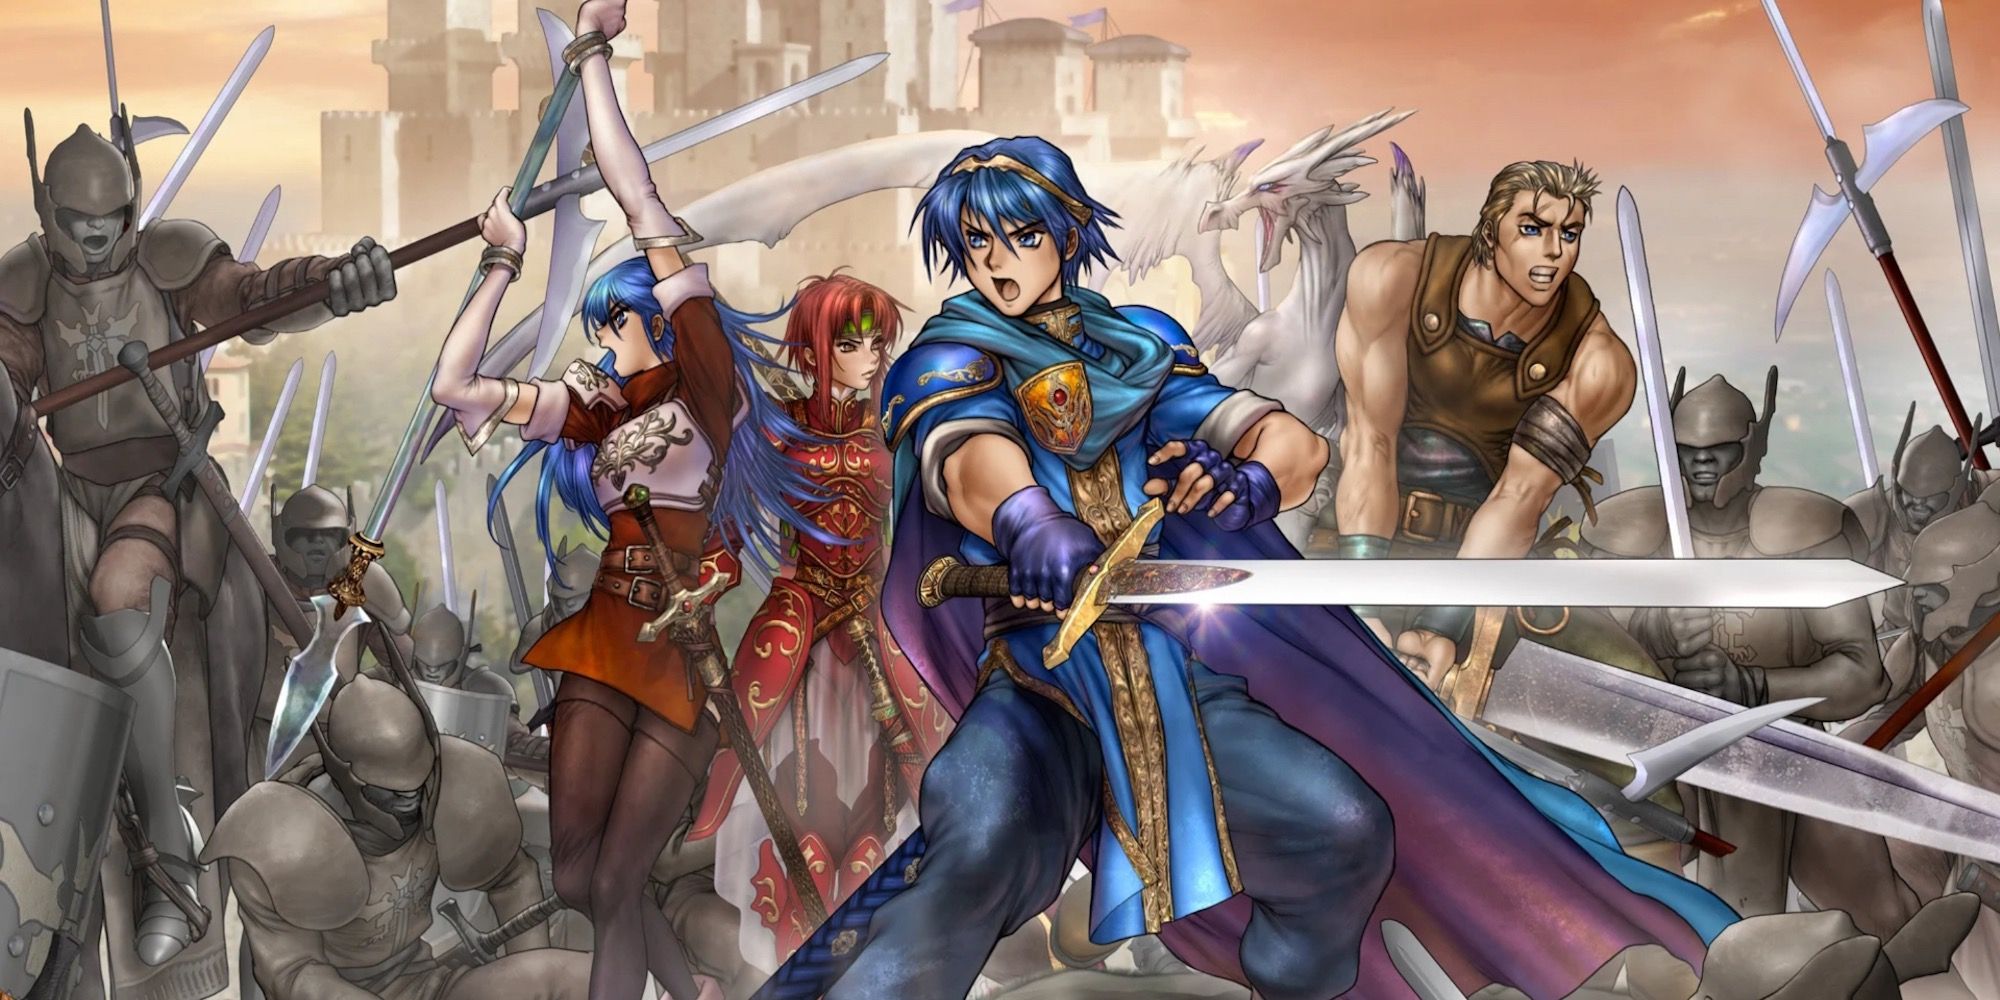 Promo art featuring characters in Fire Emblem Shadow Dragon